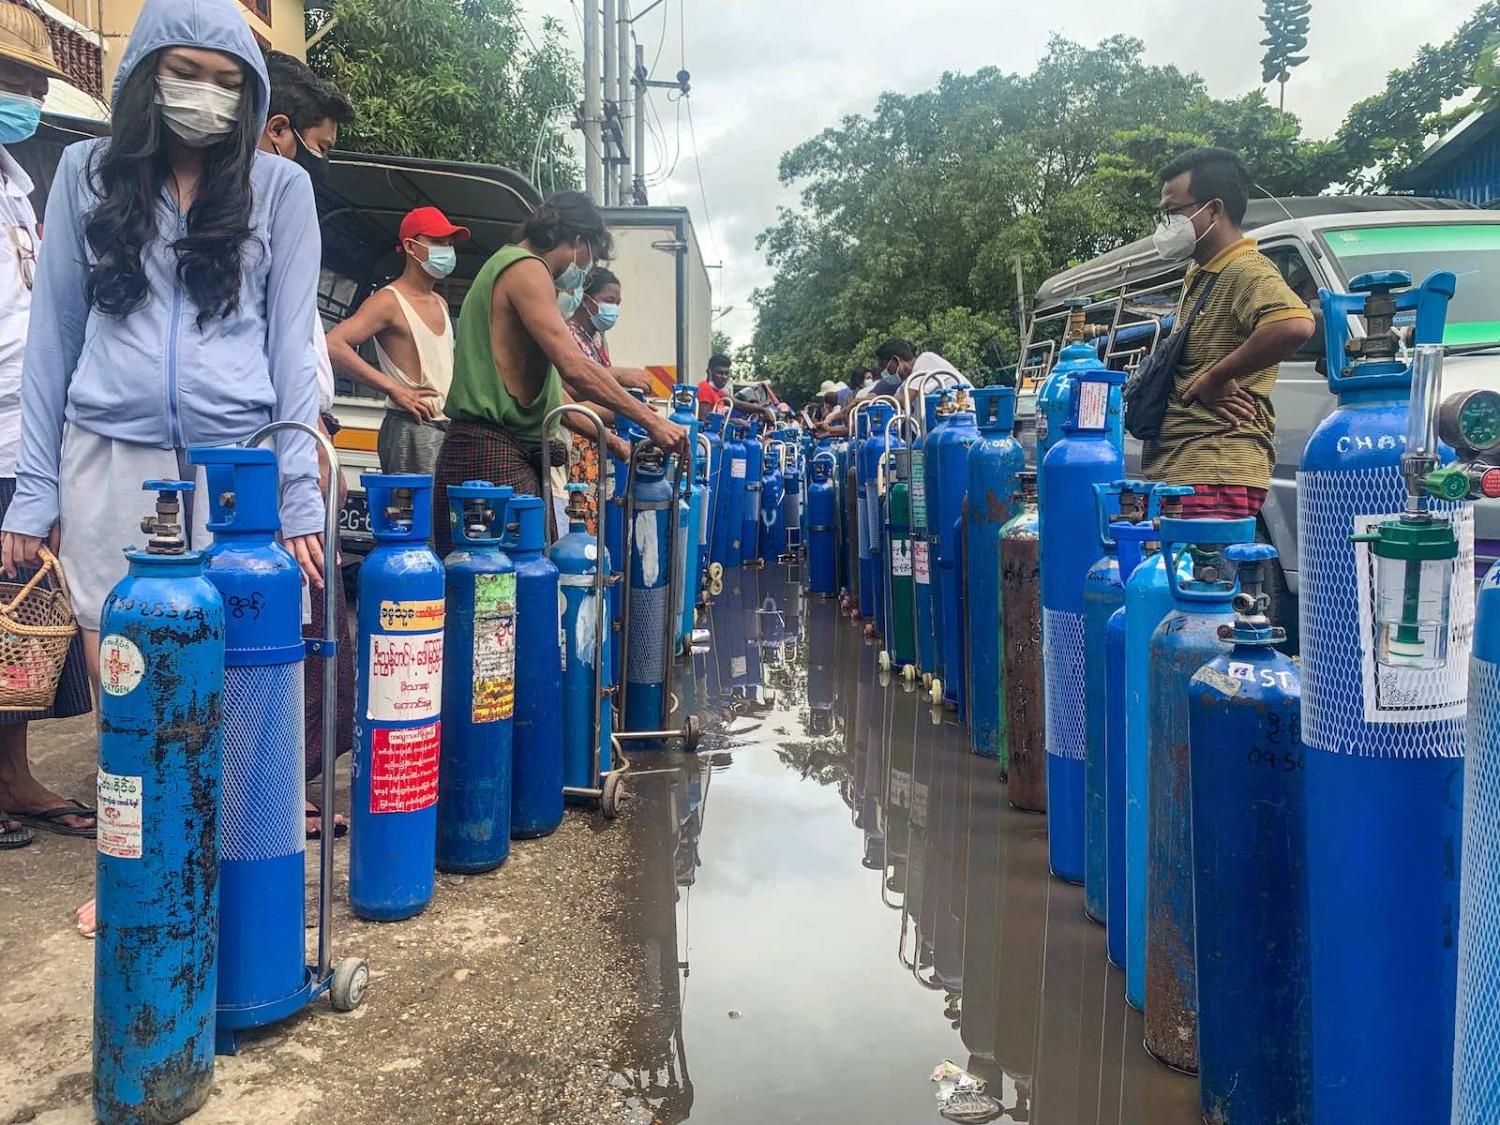 People stand with empty oxygen canisters as they wait to fill them up outside a factory in Yangon on 11 July (Ye Aung Thu/AFP via Getty Images)